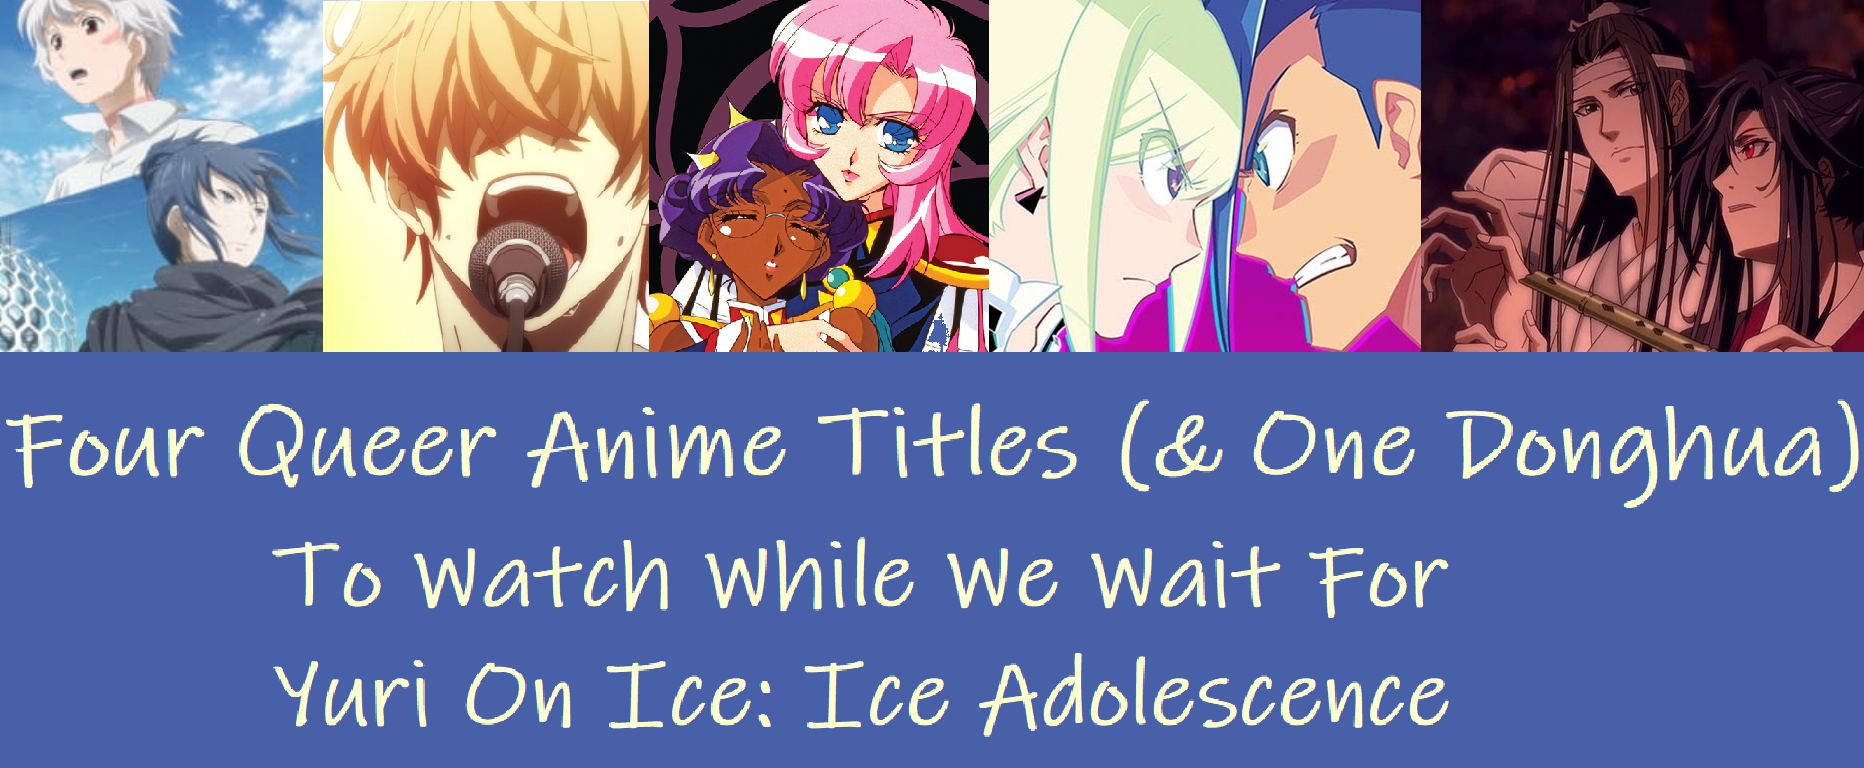 4 Queer Anime Titles 1 Donghua To Watch While Waiting For Yuri On Ice